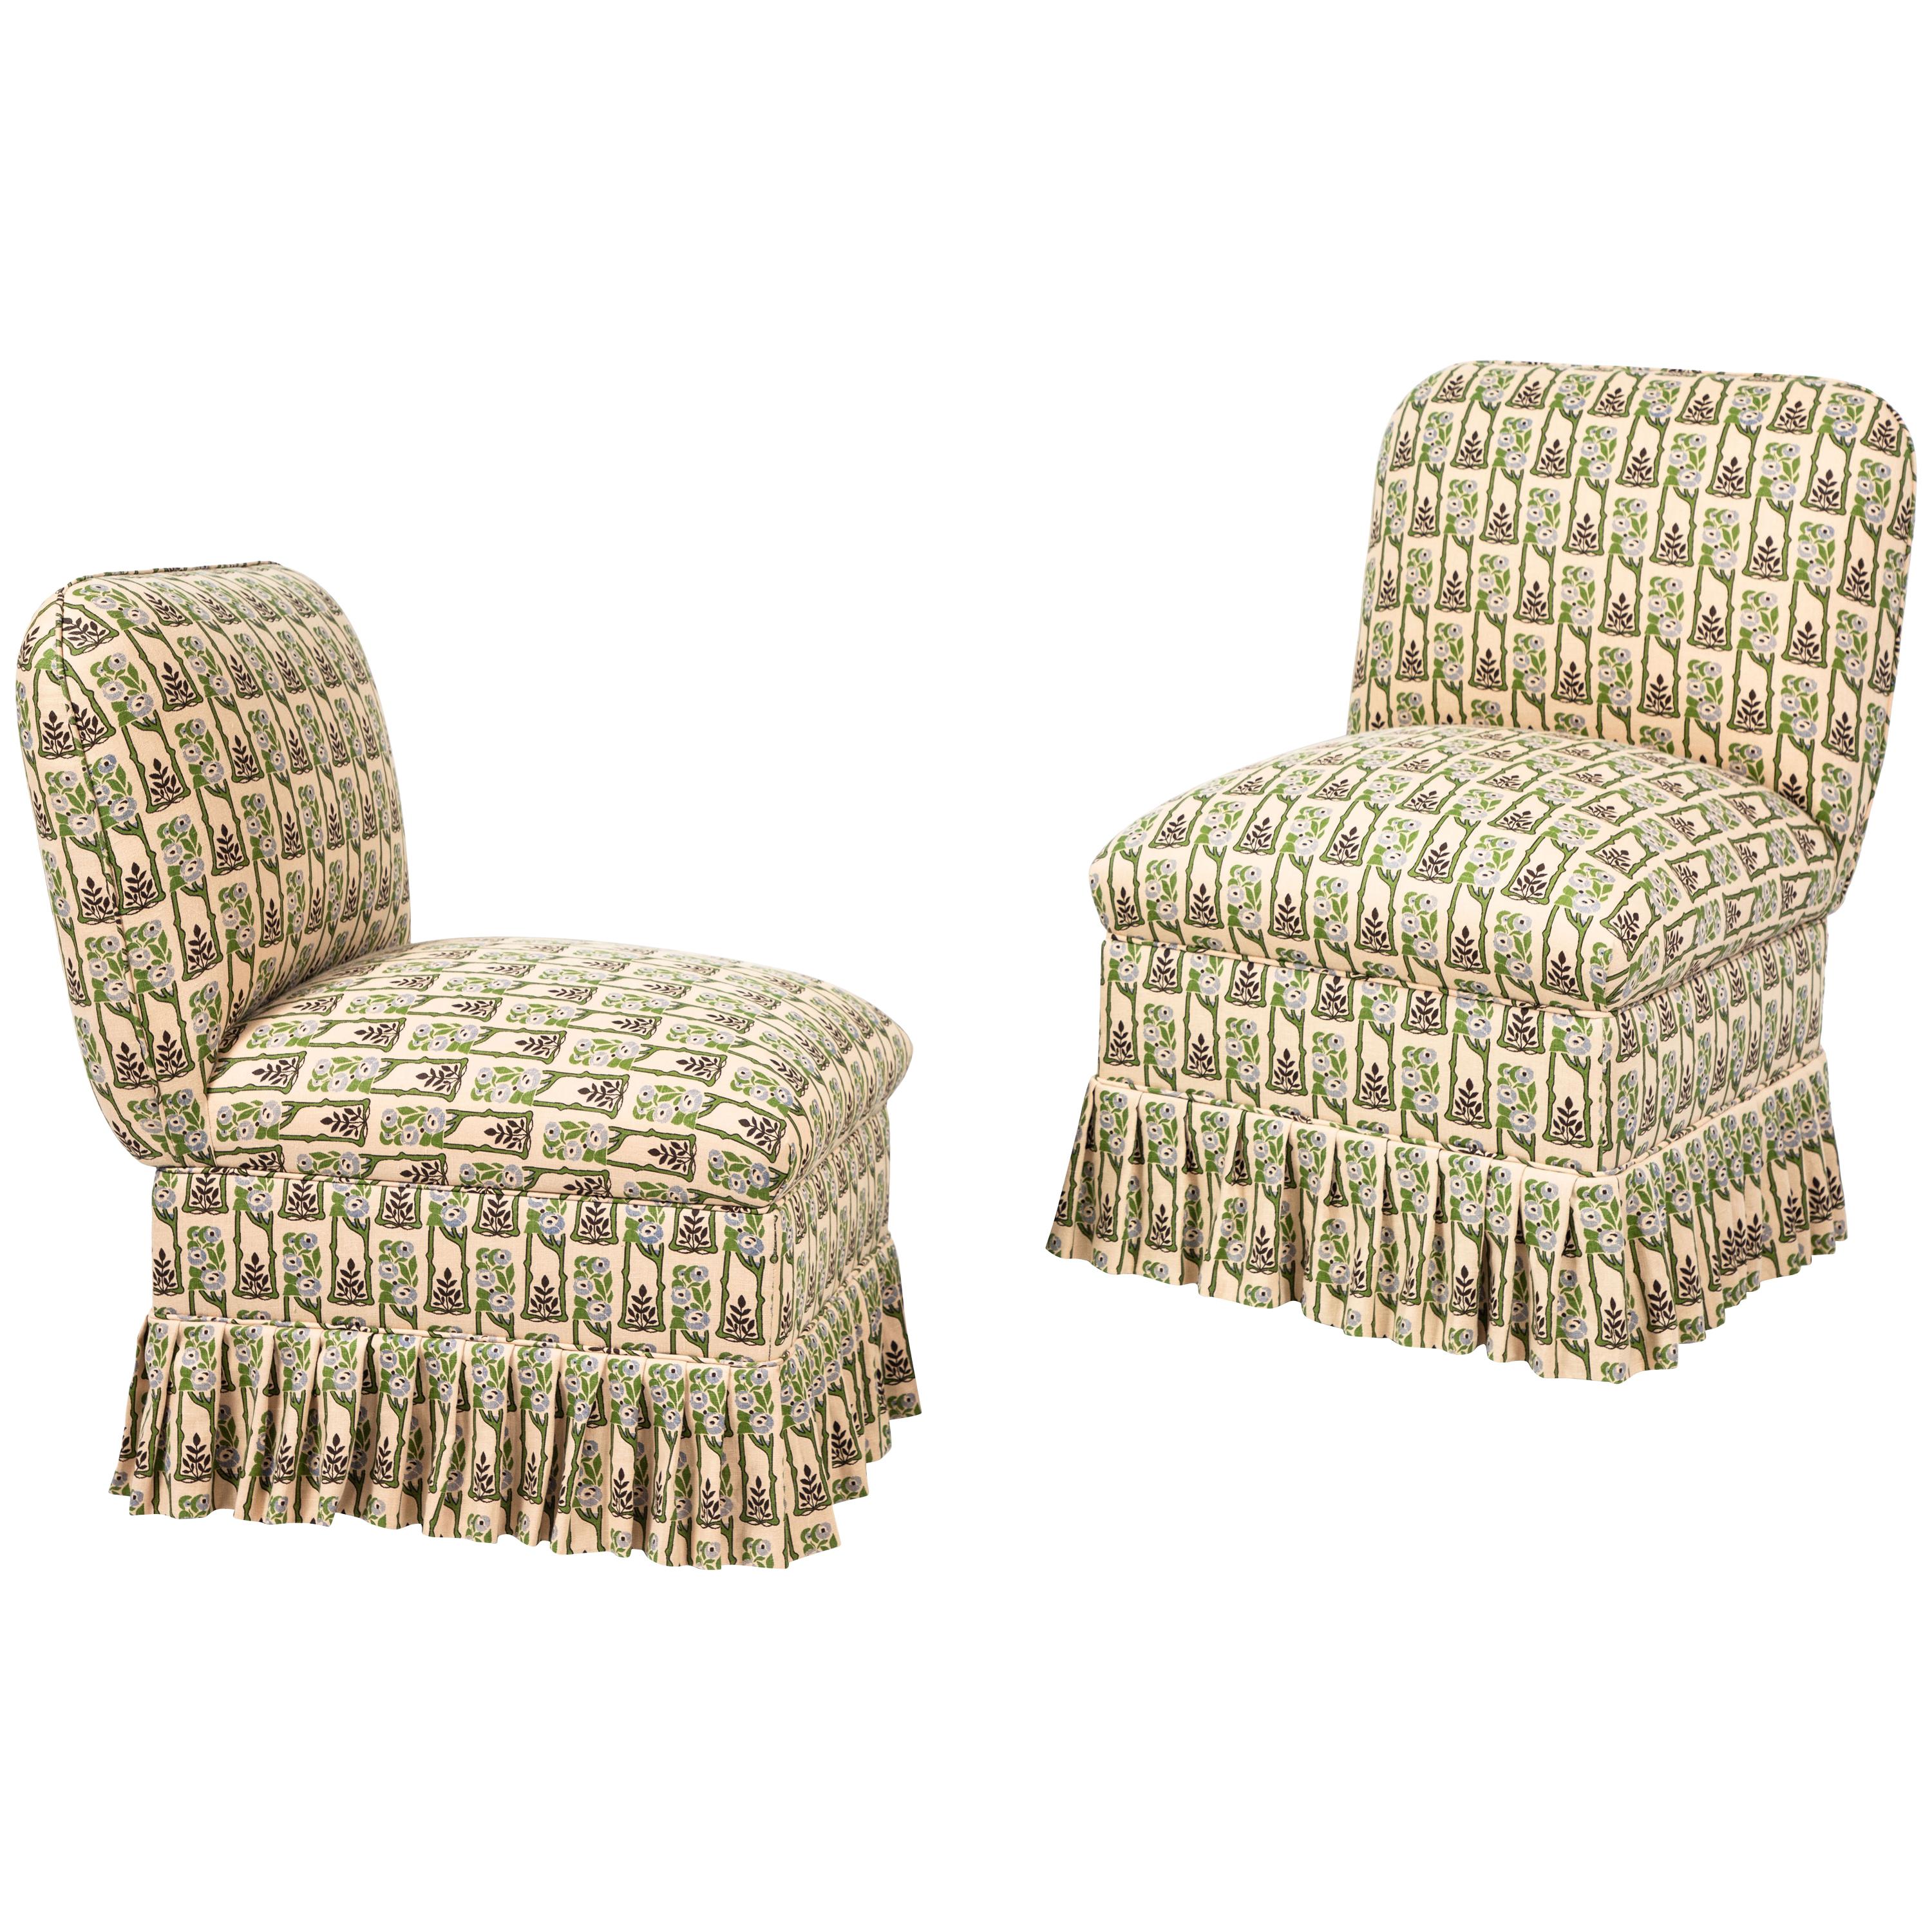 Slipper Chair with Floral Pleated Skirt